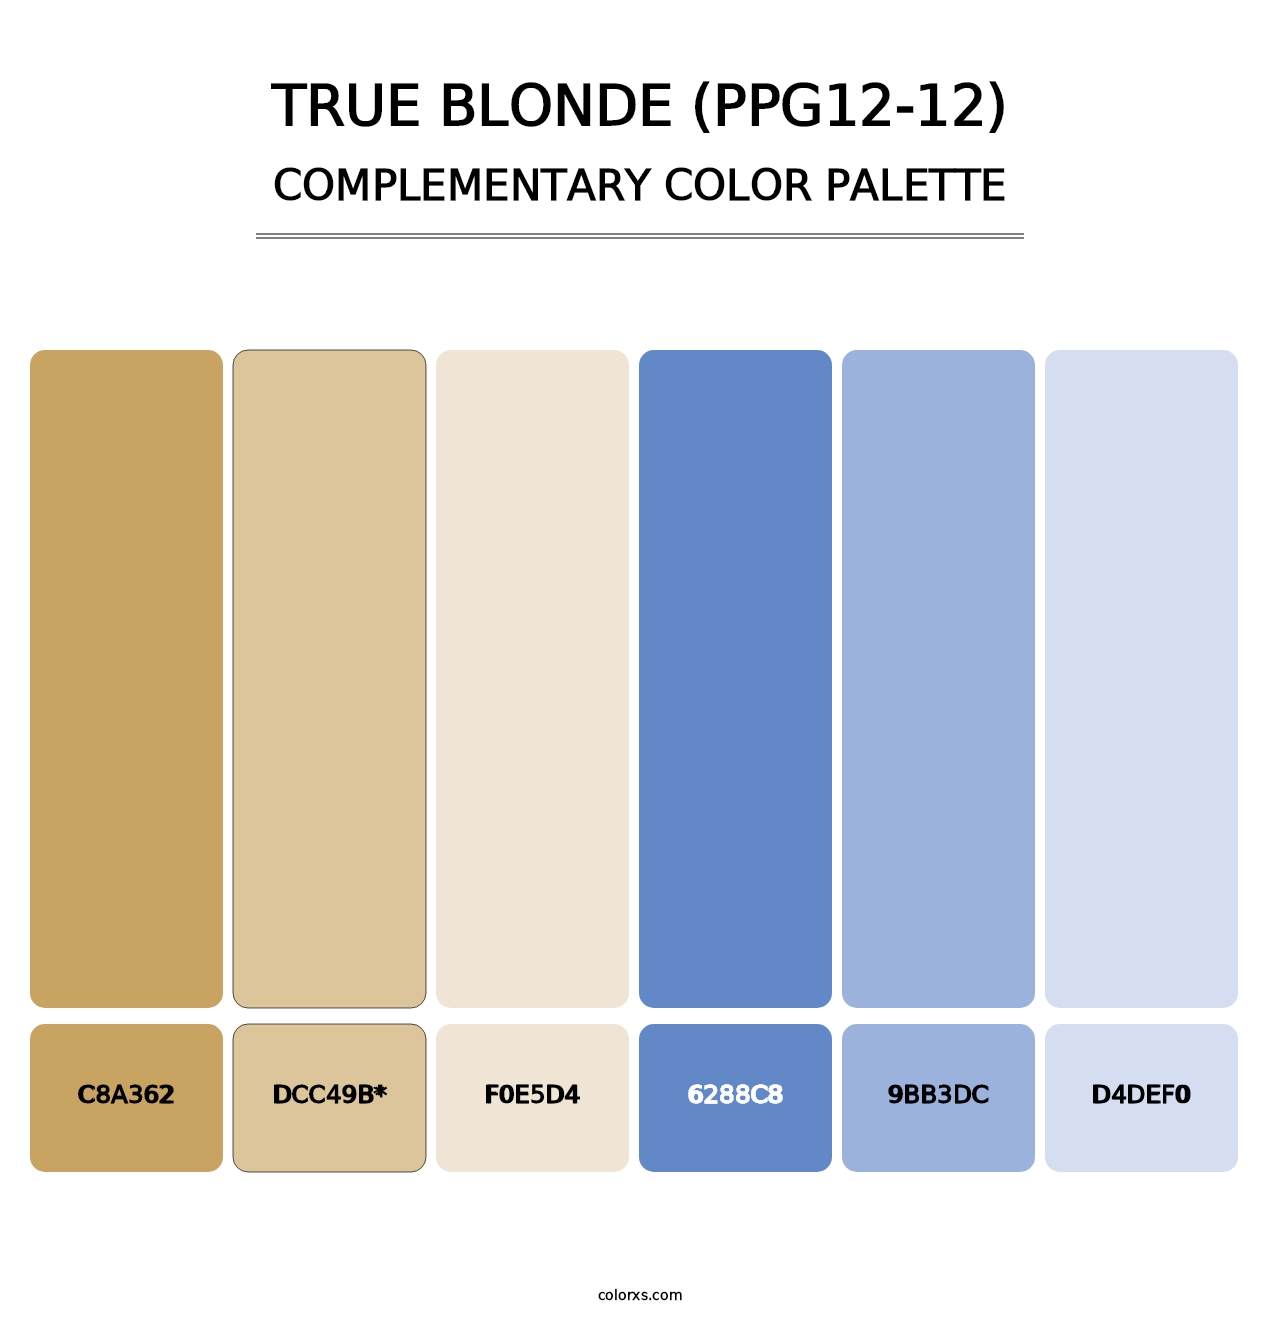 True Blonde (PPG12-12) - Complementary Color Palette